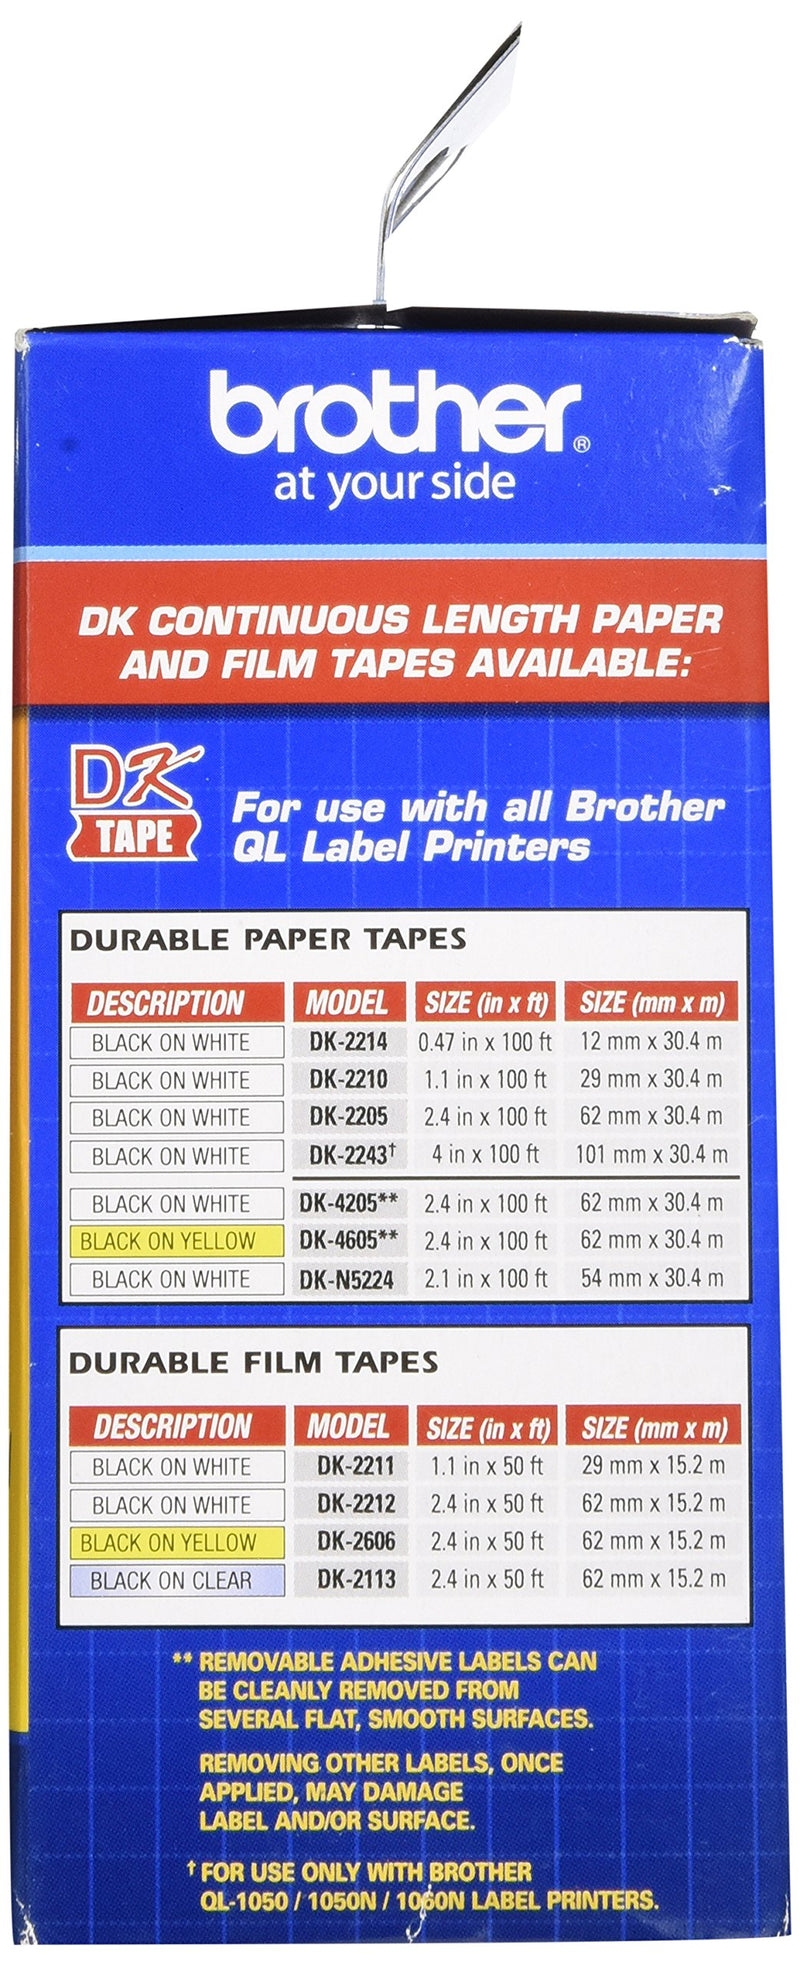 Brother Genuine DK-2210 Continuous Length Black on White Paper Tape for Brother QL Label Printers, 1.1" x 100' (29mm x 30.4M), 1 Roll per Box, DK2210